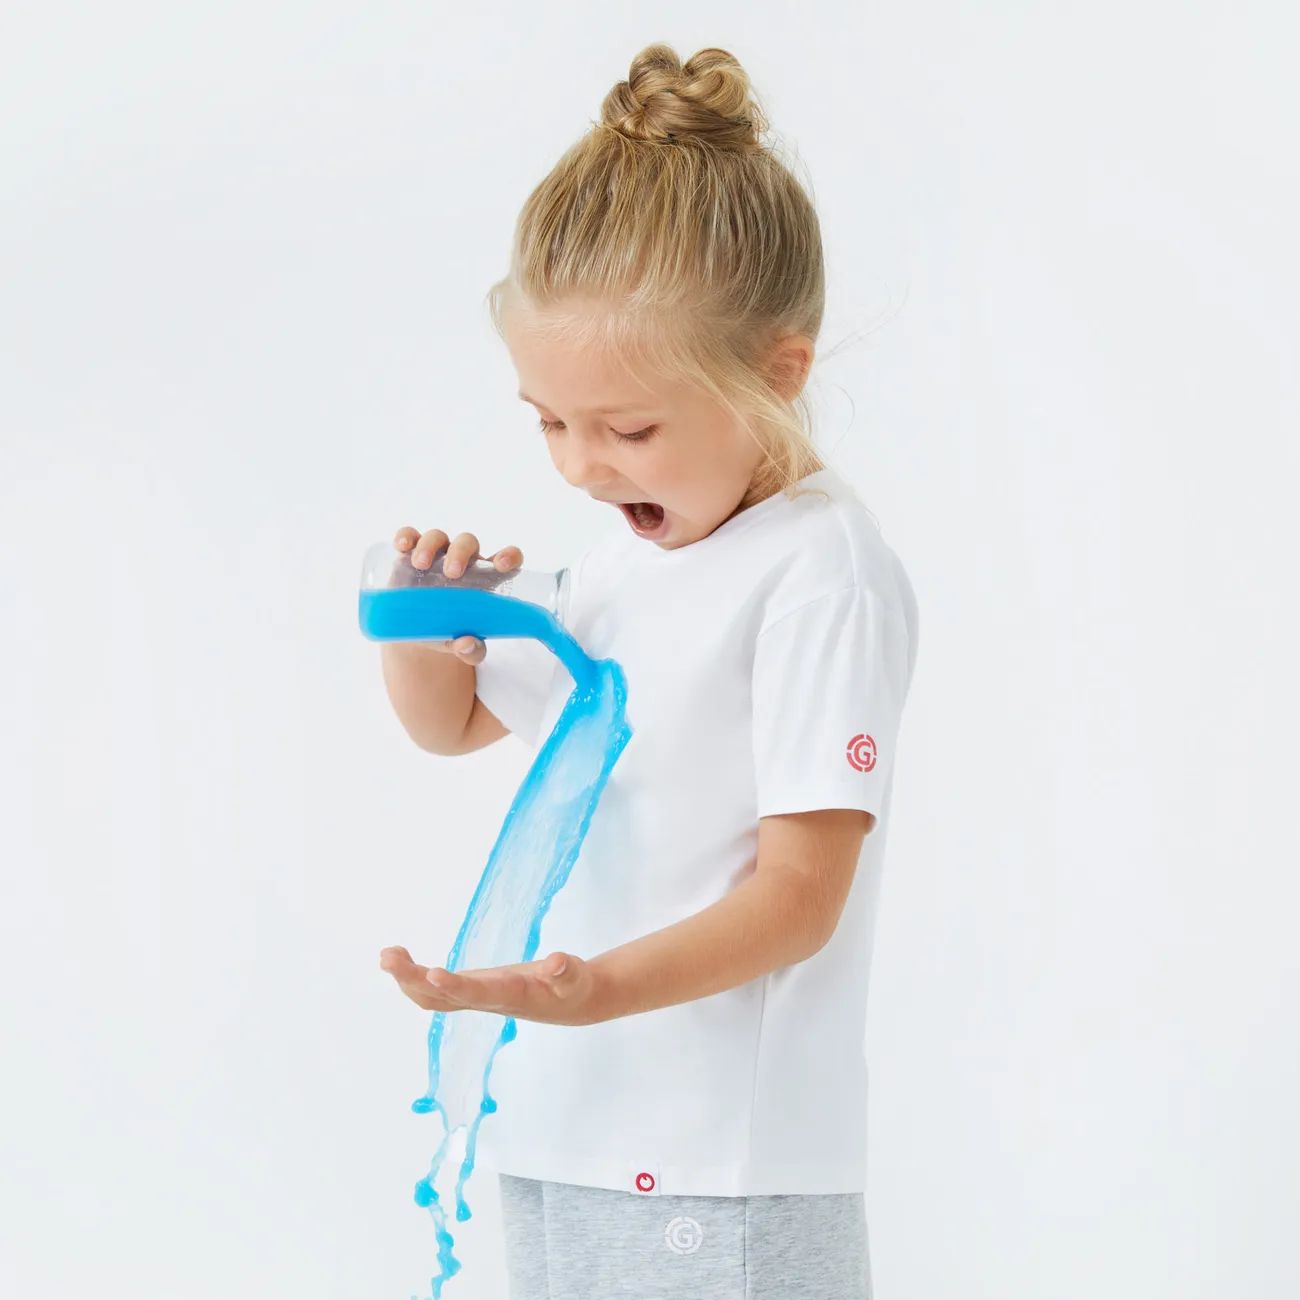 Go-Neat Water Repellent and Stain Resistant T-Shirts for Kids | PatPat